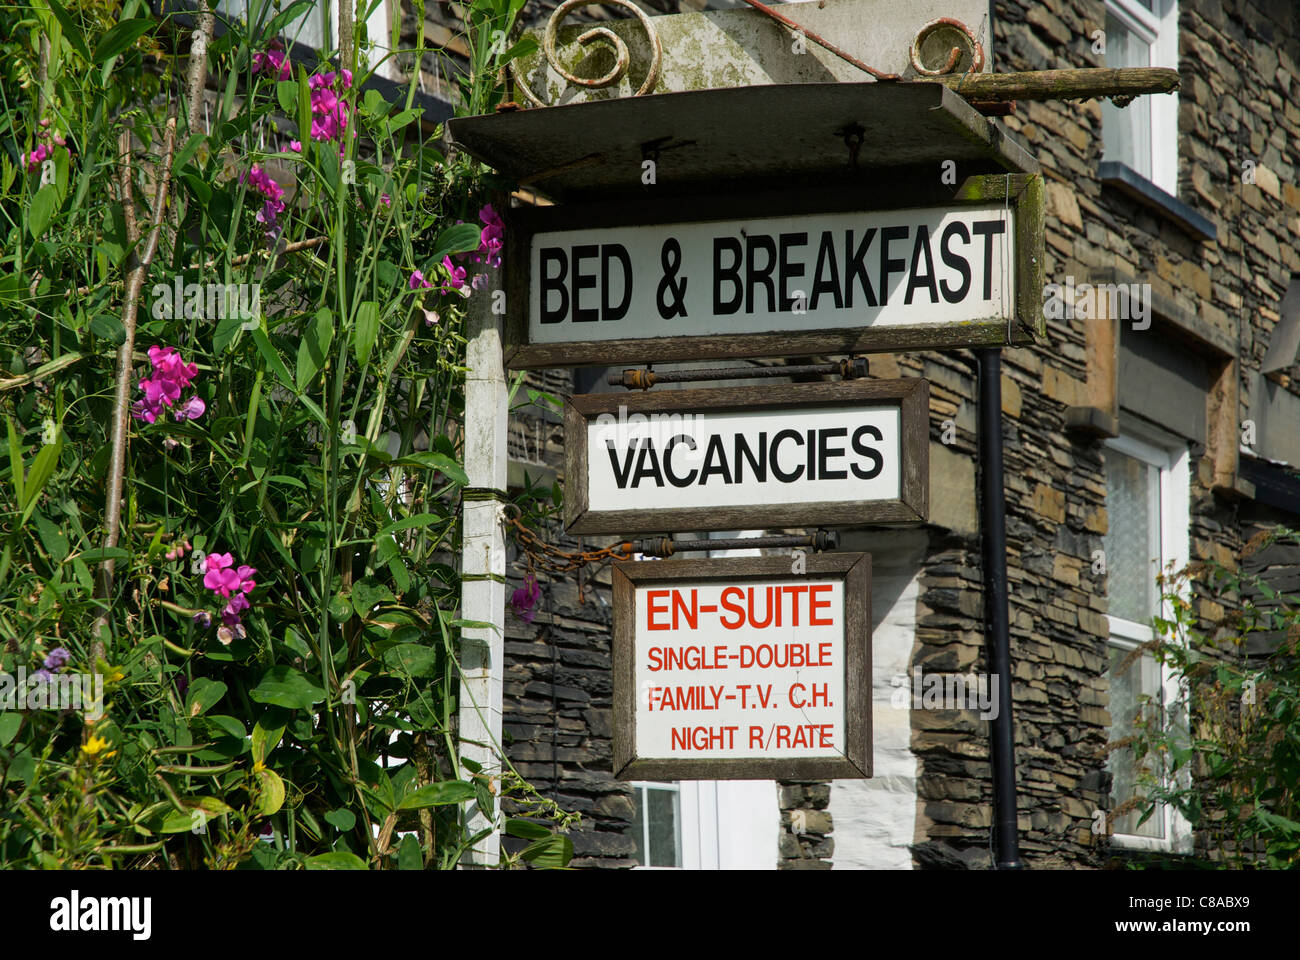 Sign for bed & breakfast accommodation, Windermere town, Lake District